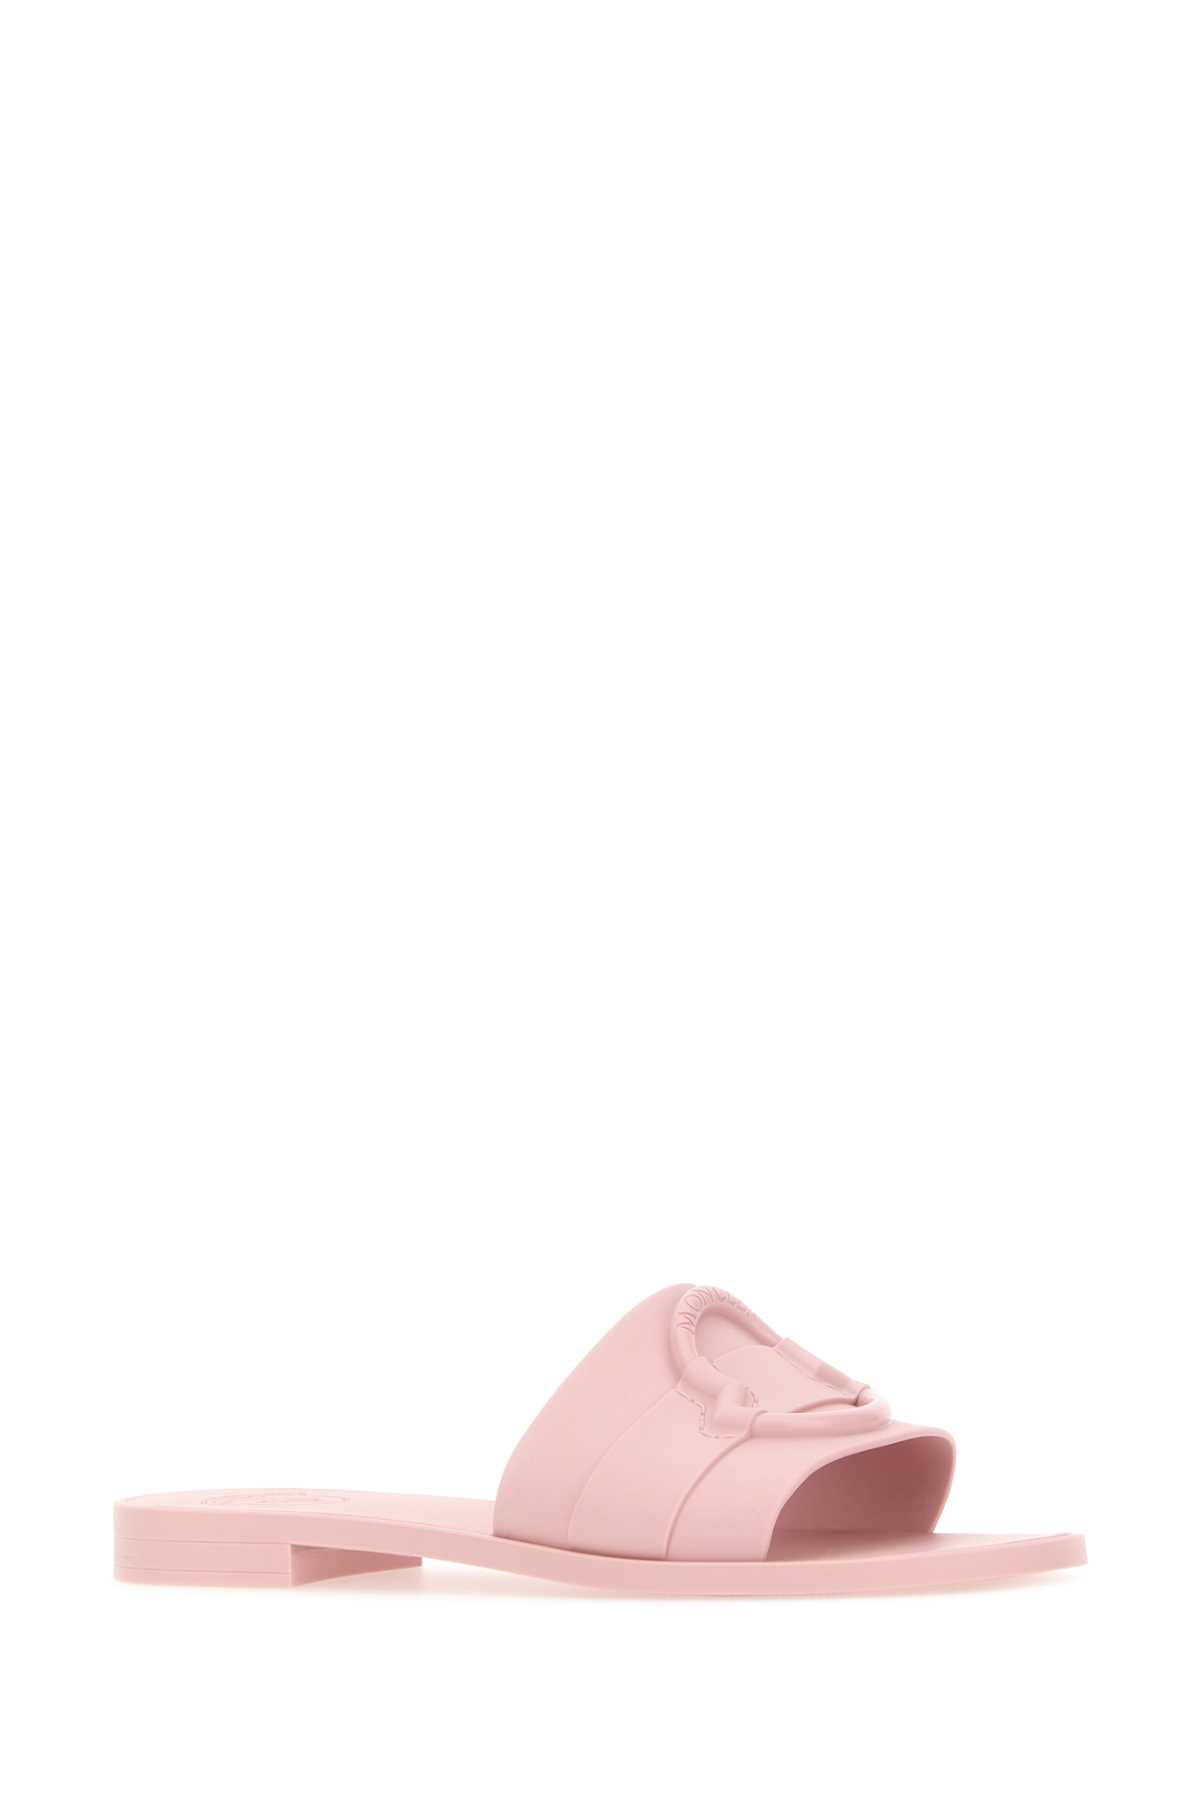 MONCLER PASTEL PINK RUBBER MON SLIPPERS